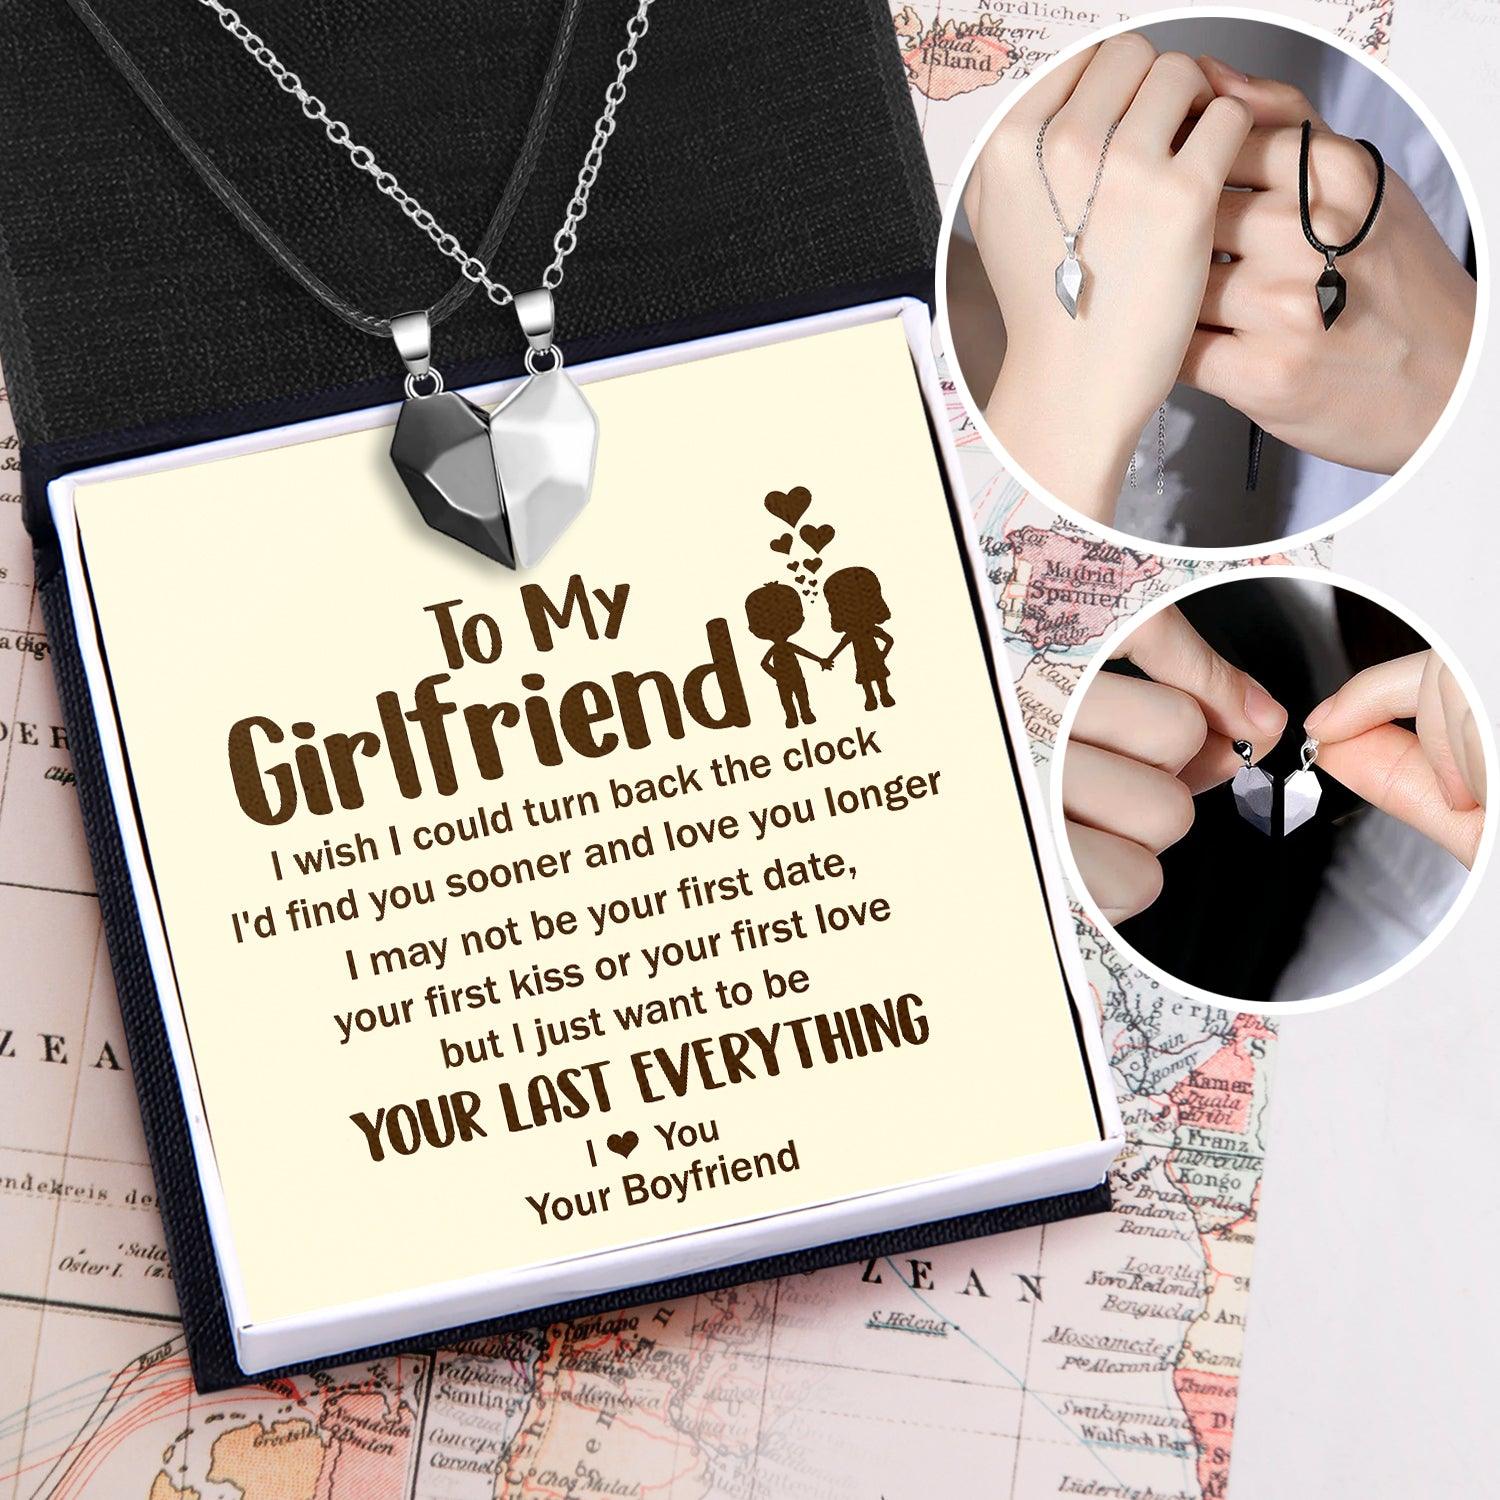 Best Valentine's Day Gifts: 15 Romantic Ideas for Your Girlfriend | Kalung